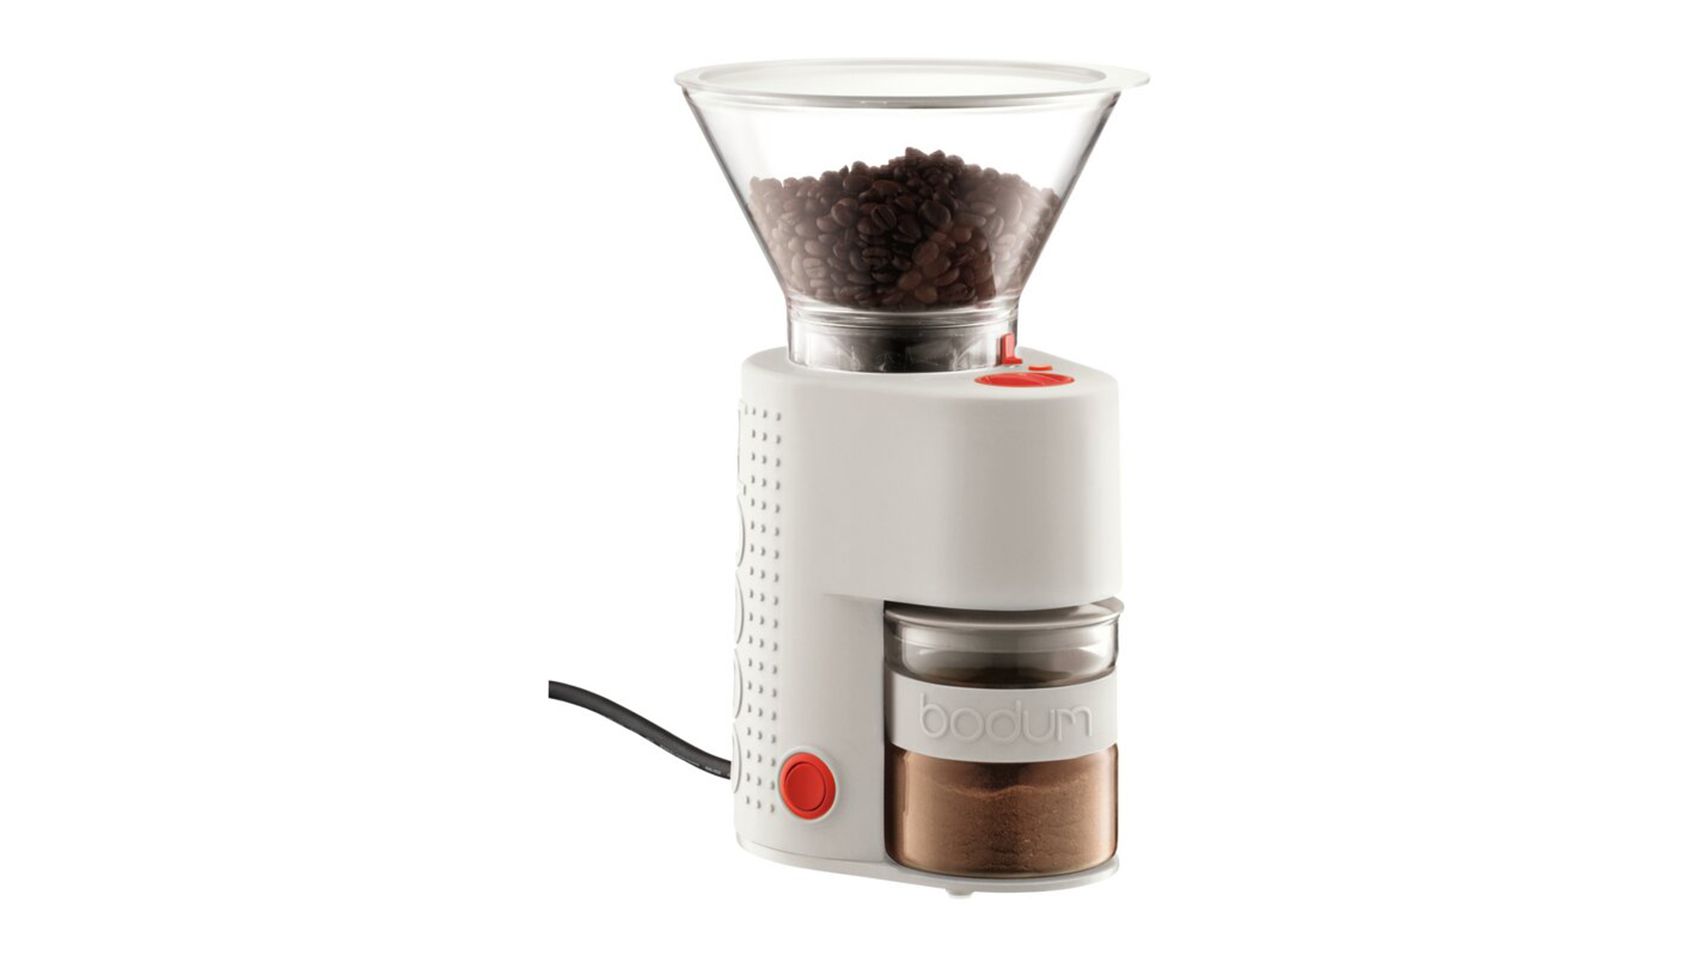 Bodum Gifts & Coffee Accessories under $20 - Reality Roasters Coffee